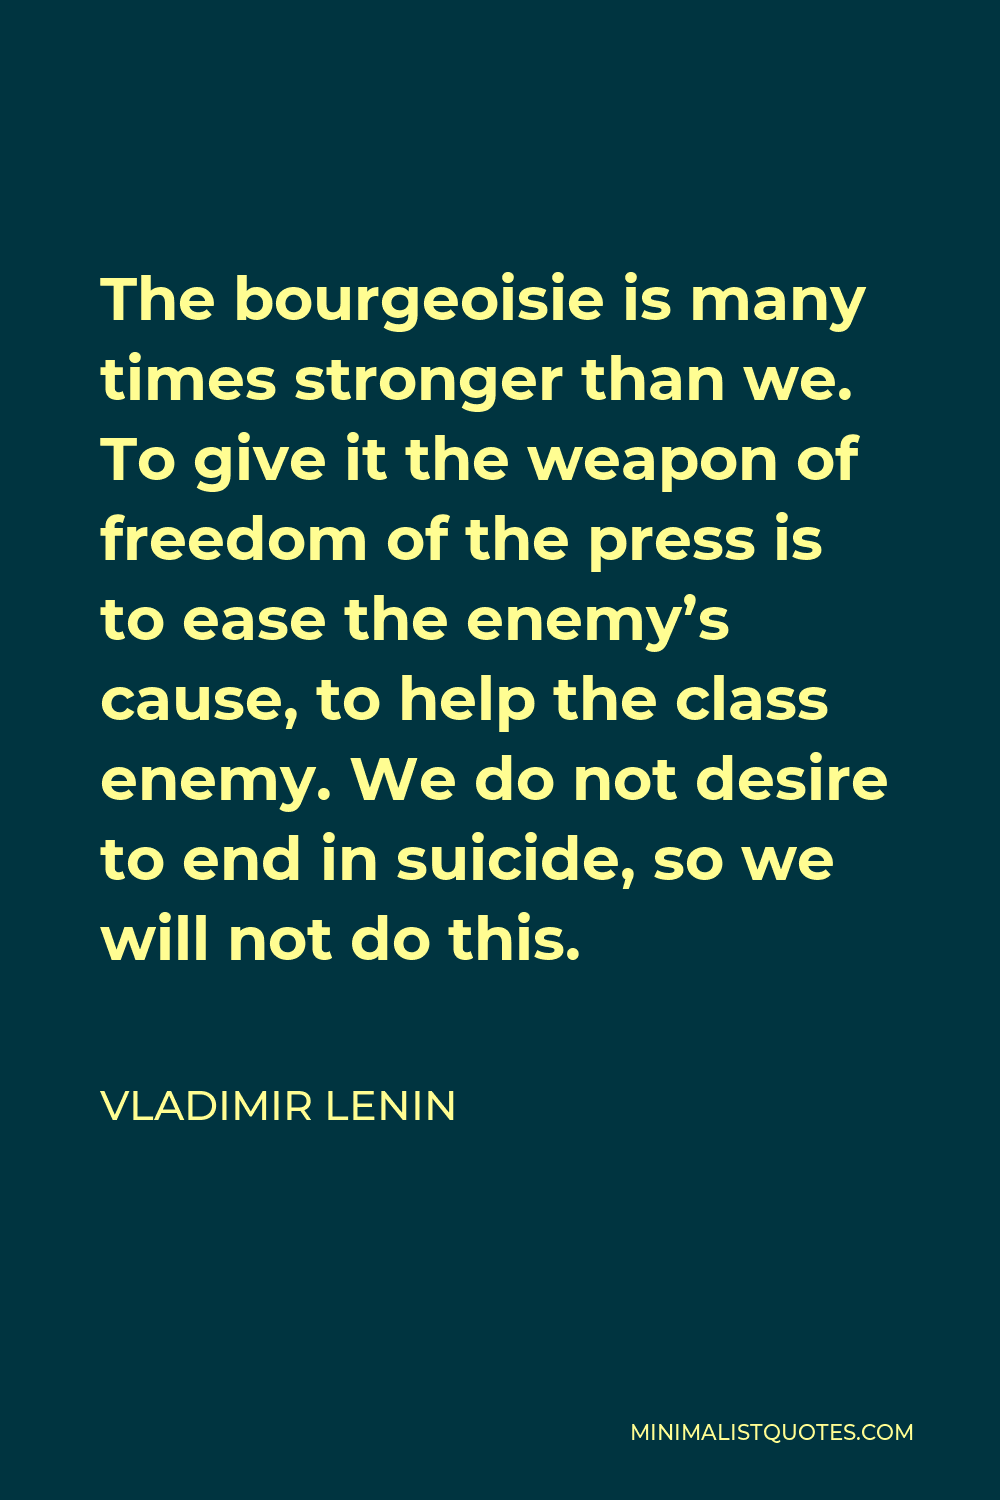 Vladimir Lenin Quote - The bourgeoisie is many times stronger than we. To give it the weapon of freedom of the press is to ease the enemy’s cause, to help the class enemy. We do not desire to end in suicide, so we will not do this.